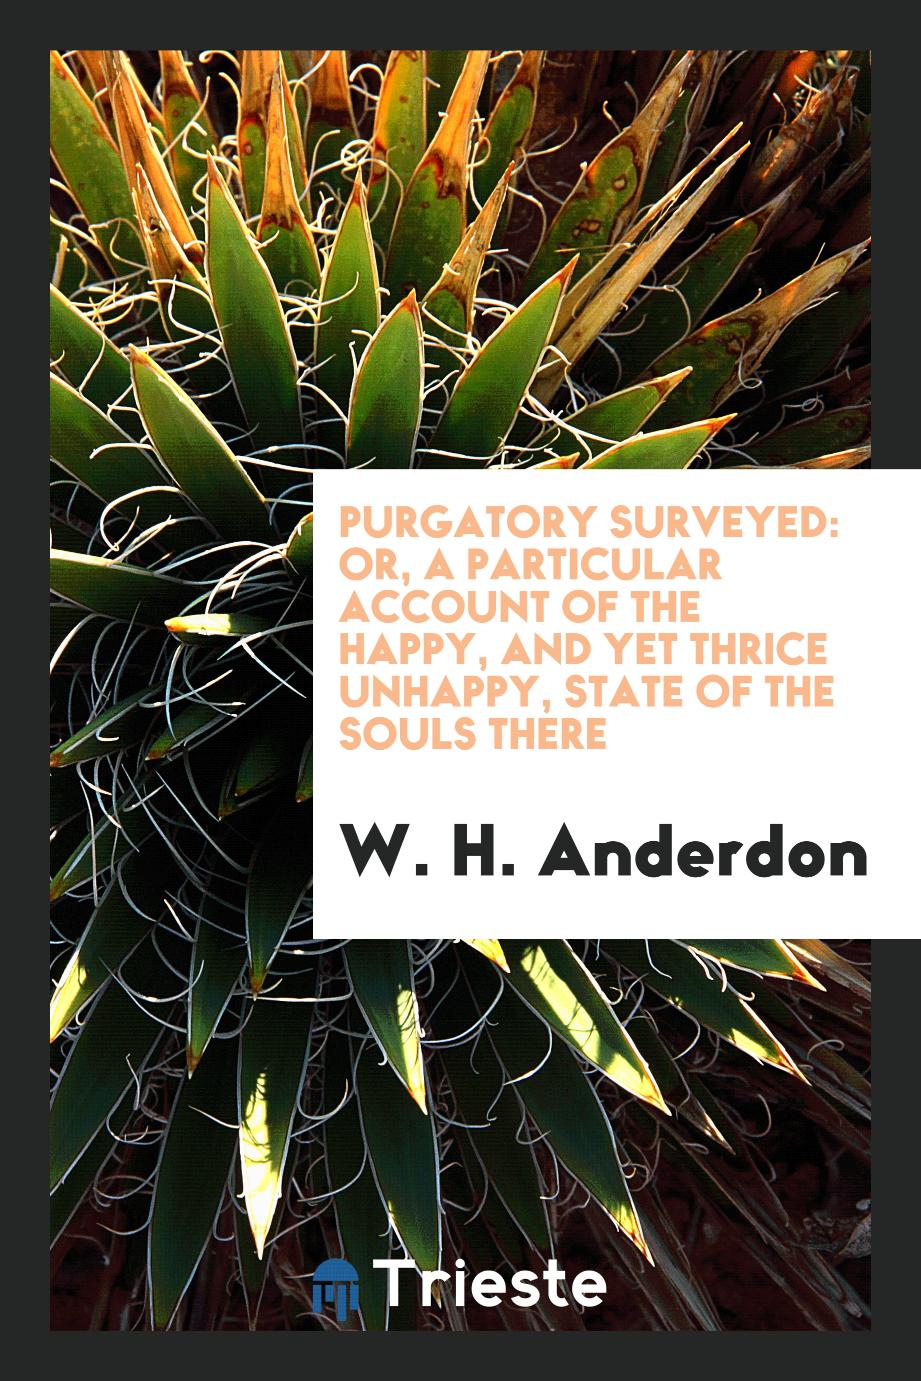 Purgatory surveyed: or, a particular account of the happy, and yet thrice unhappy, state of the souls there